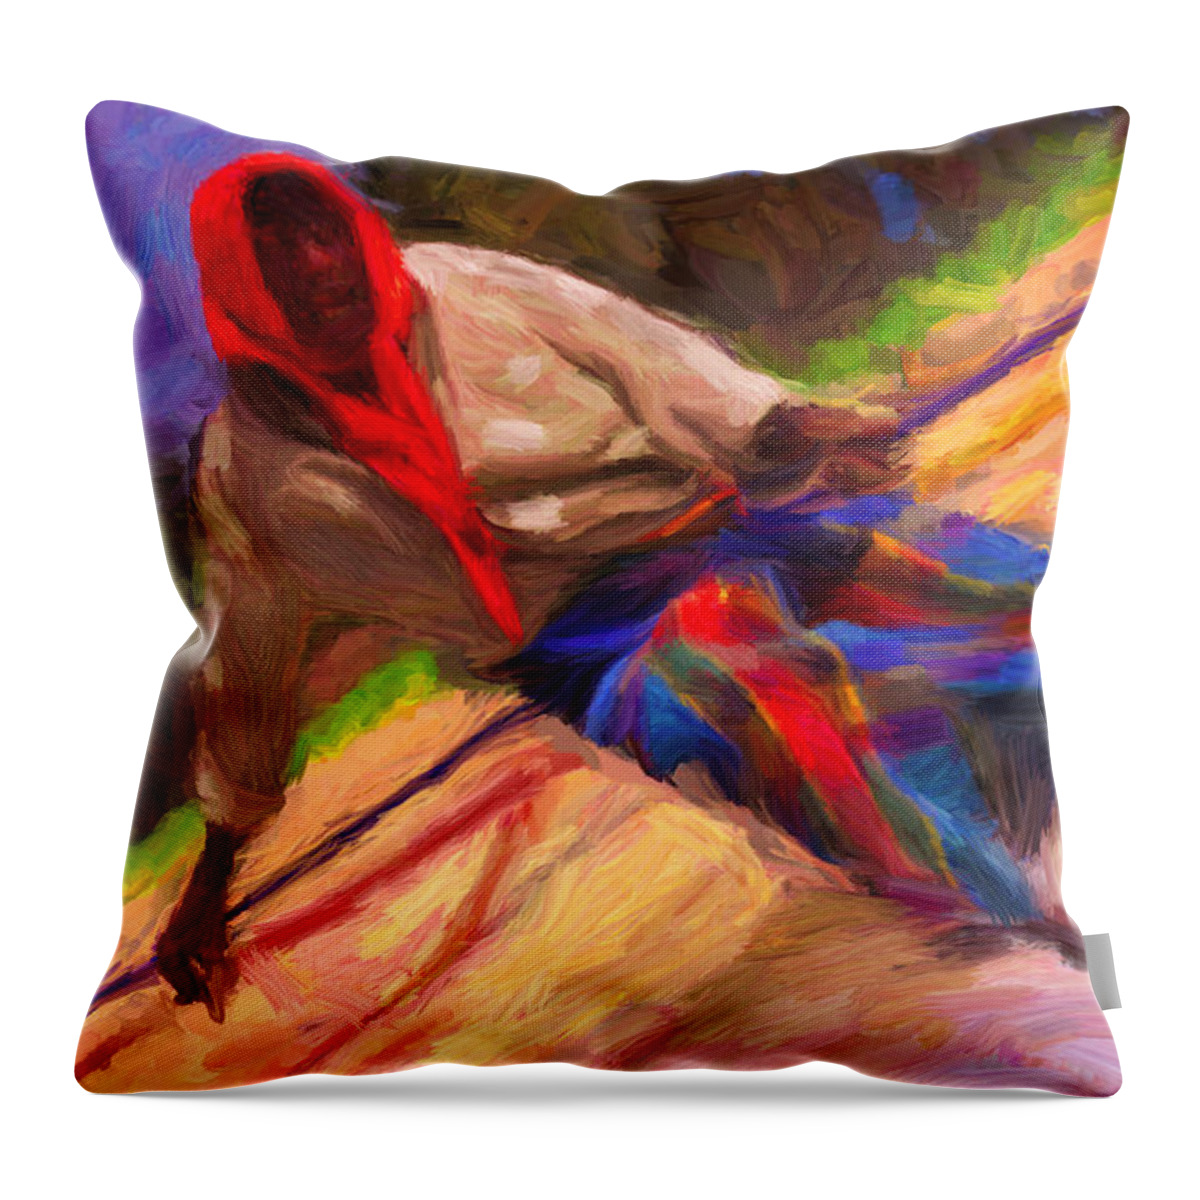 Fisherman Throw Pillow featuring the digital art Fisherman by Caito Junqueira